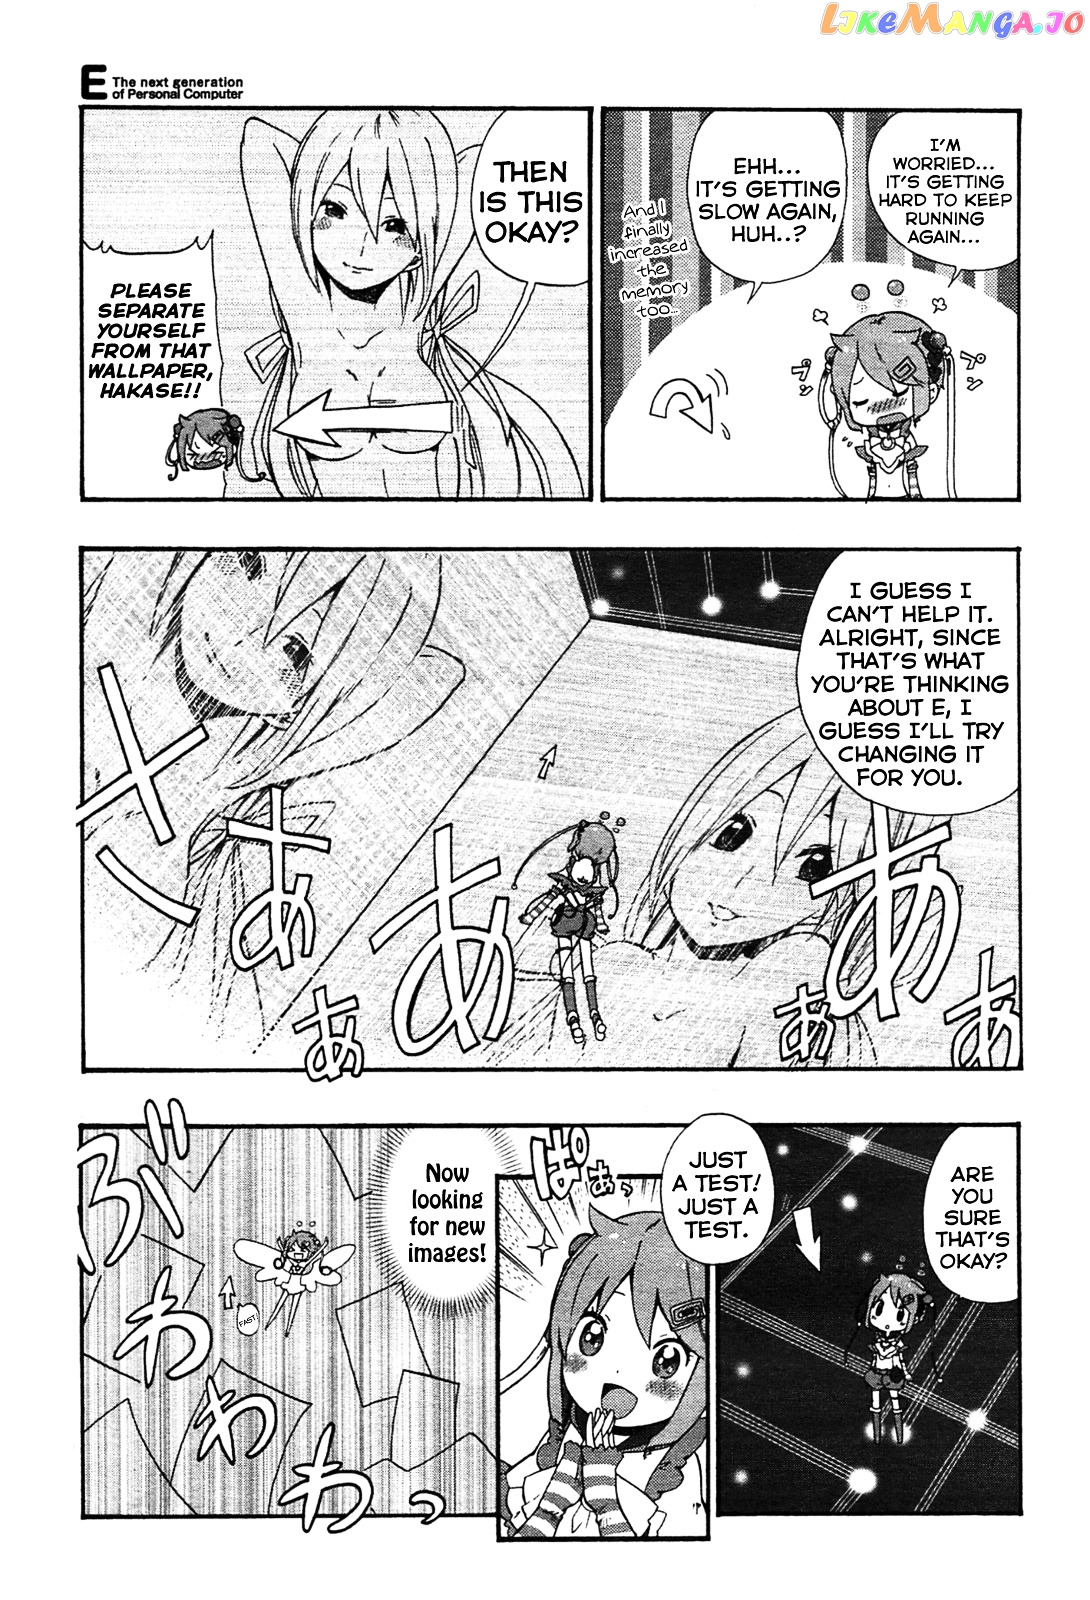 E - The Next Generation of Personal Computer chapter 2 - page 3